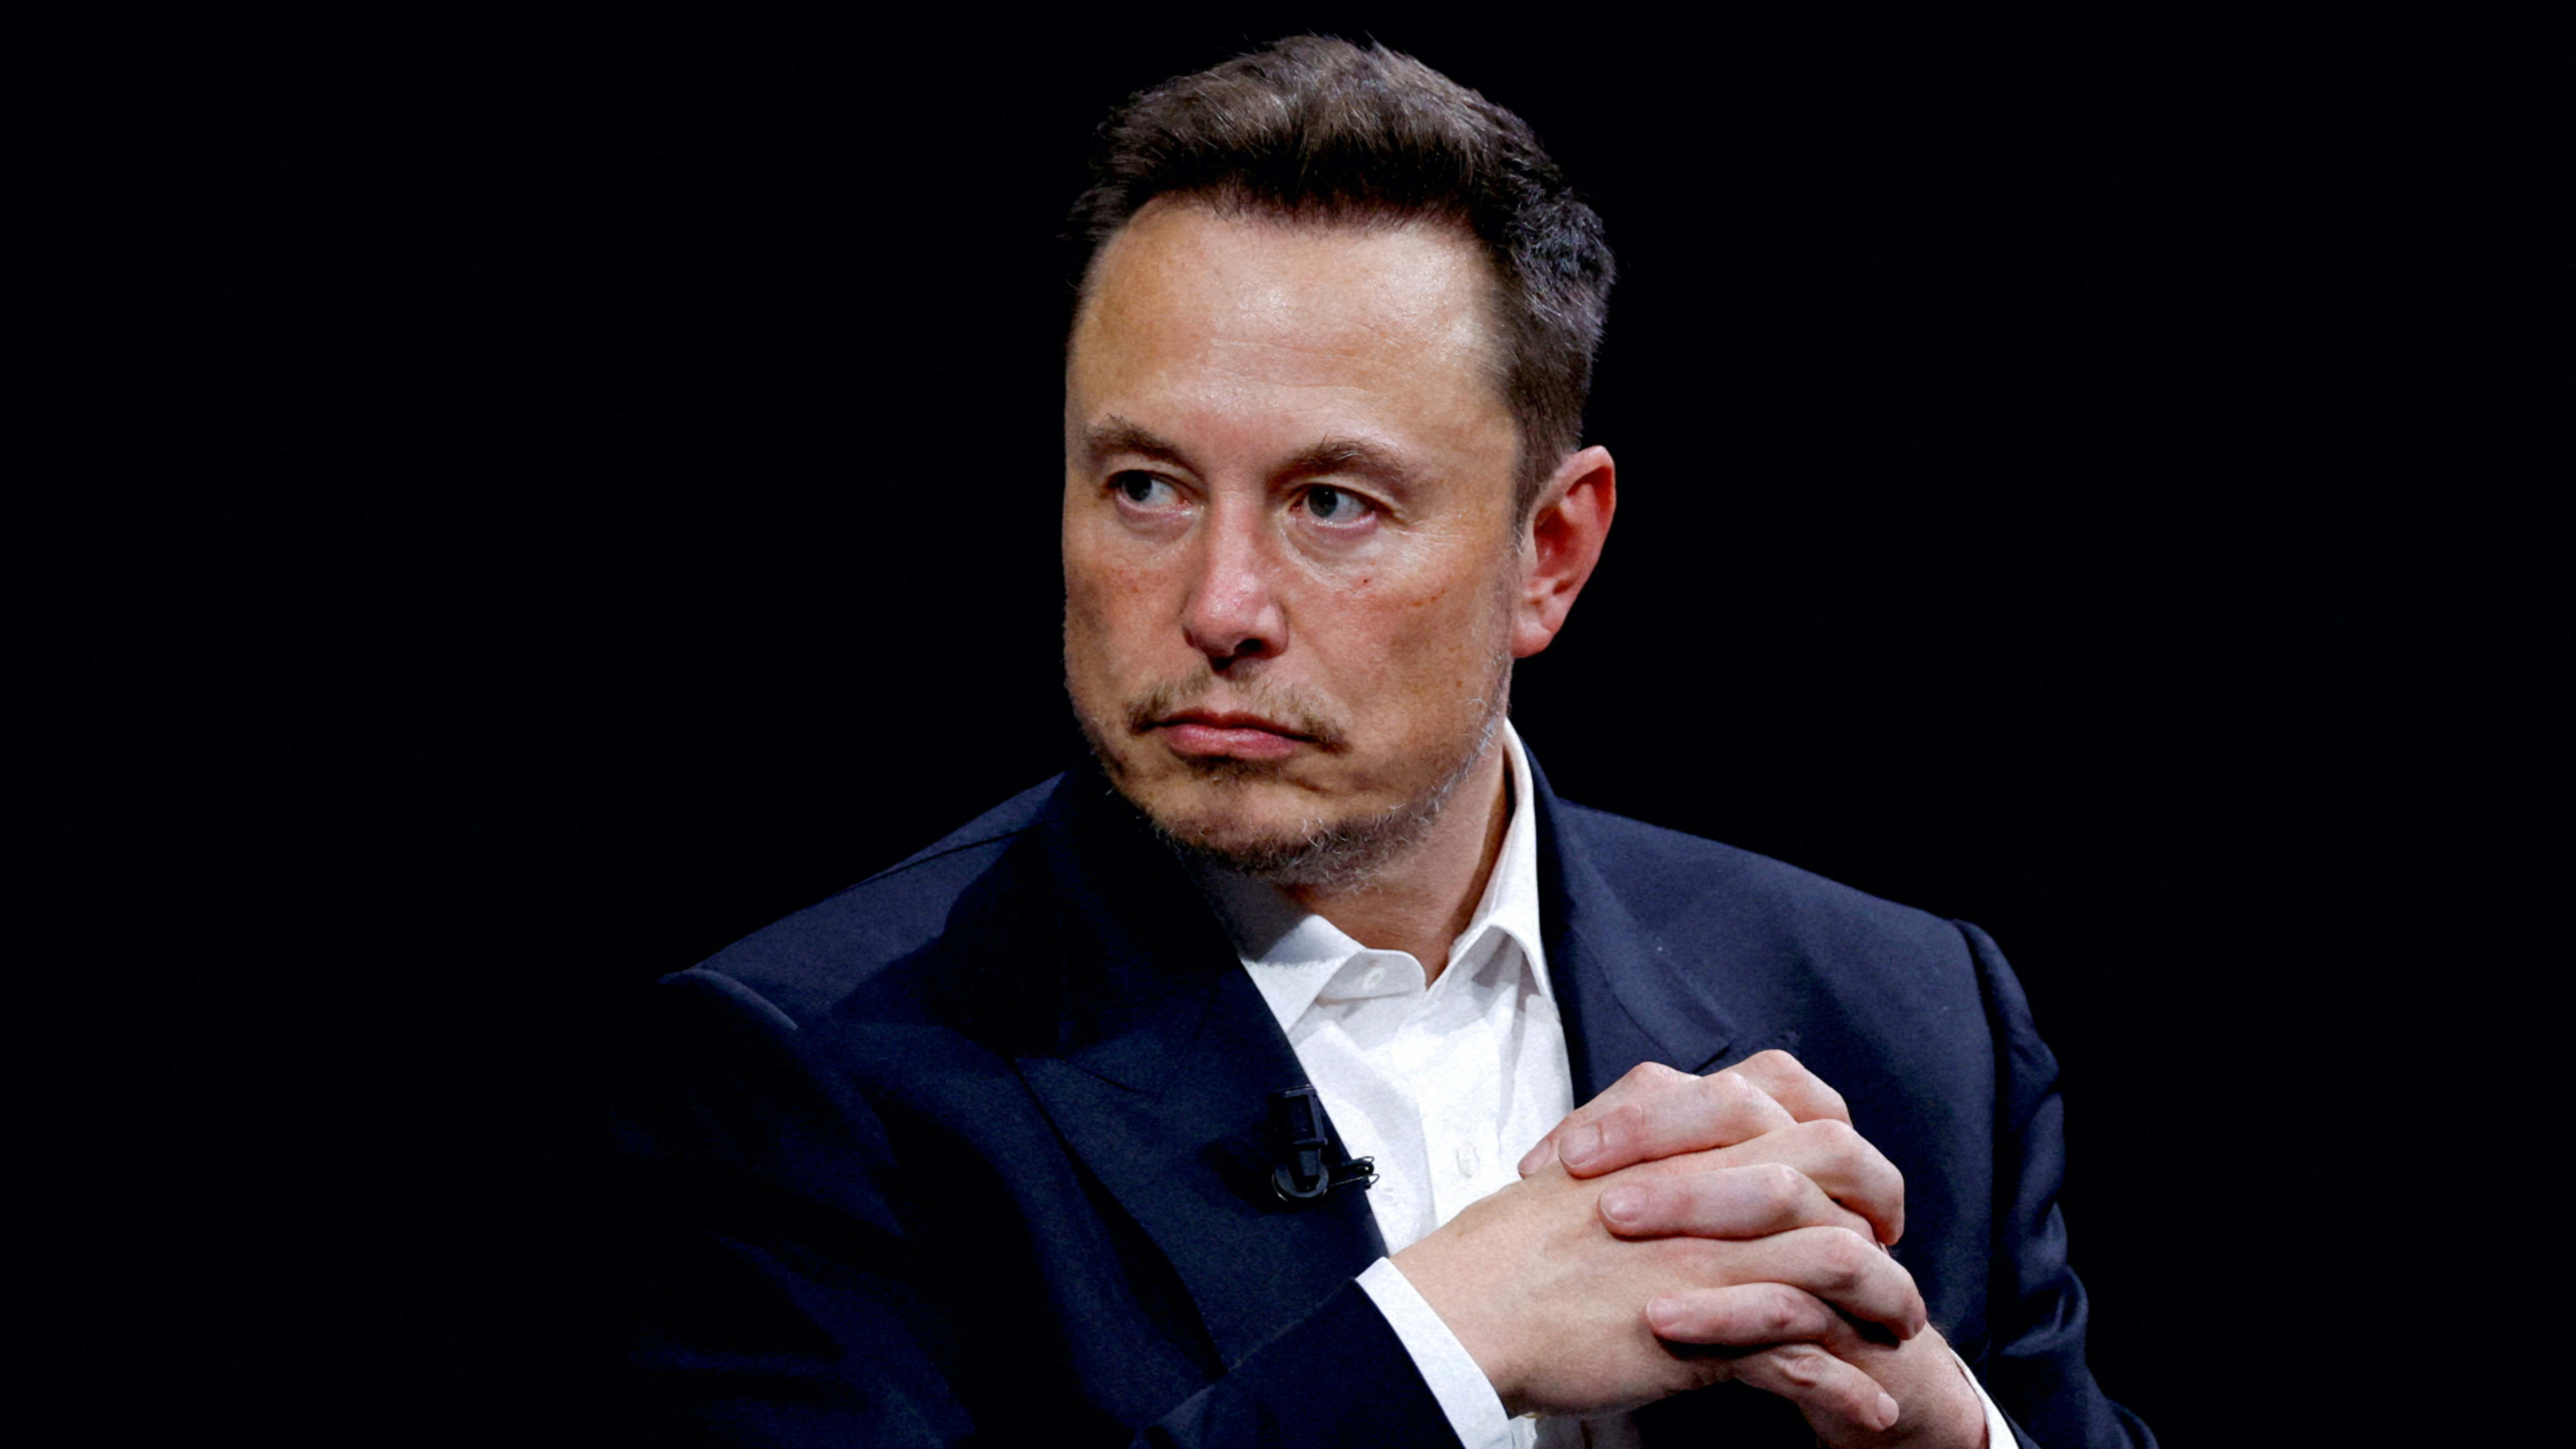 Former Twitter CEO and other executives sue Elon Musk for more than $128 million in severance